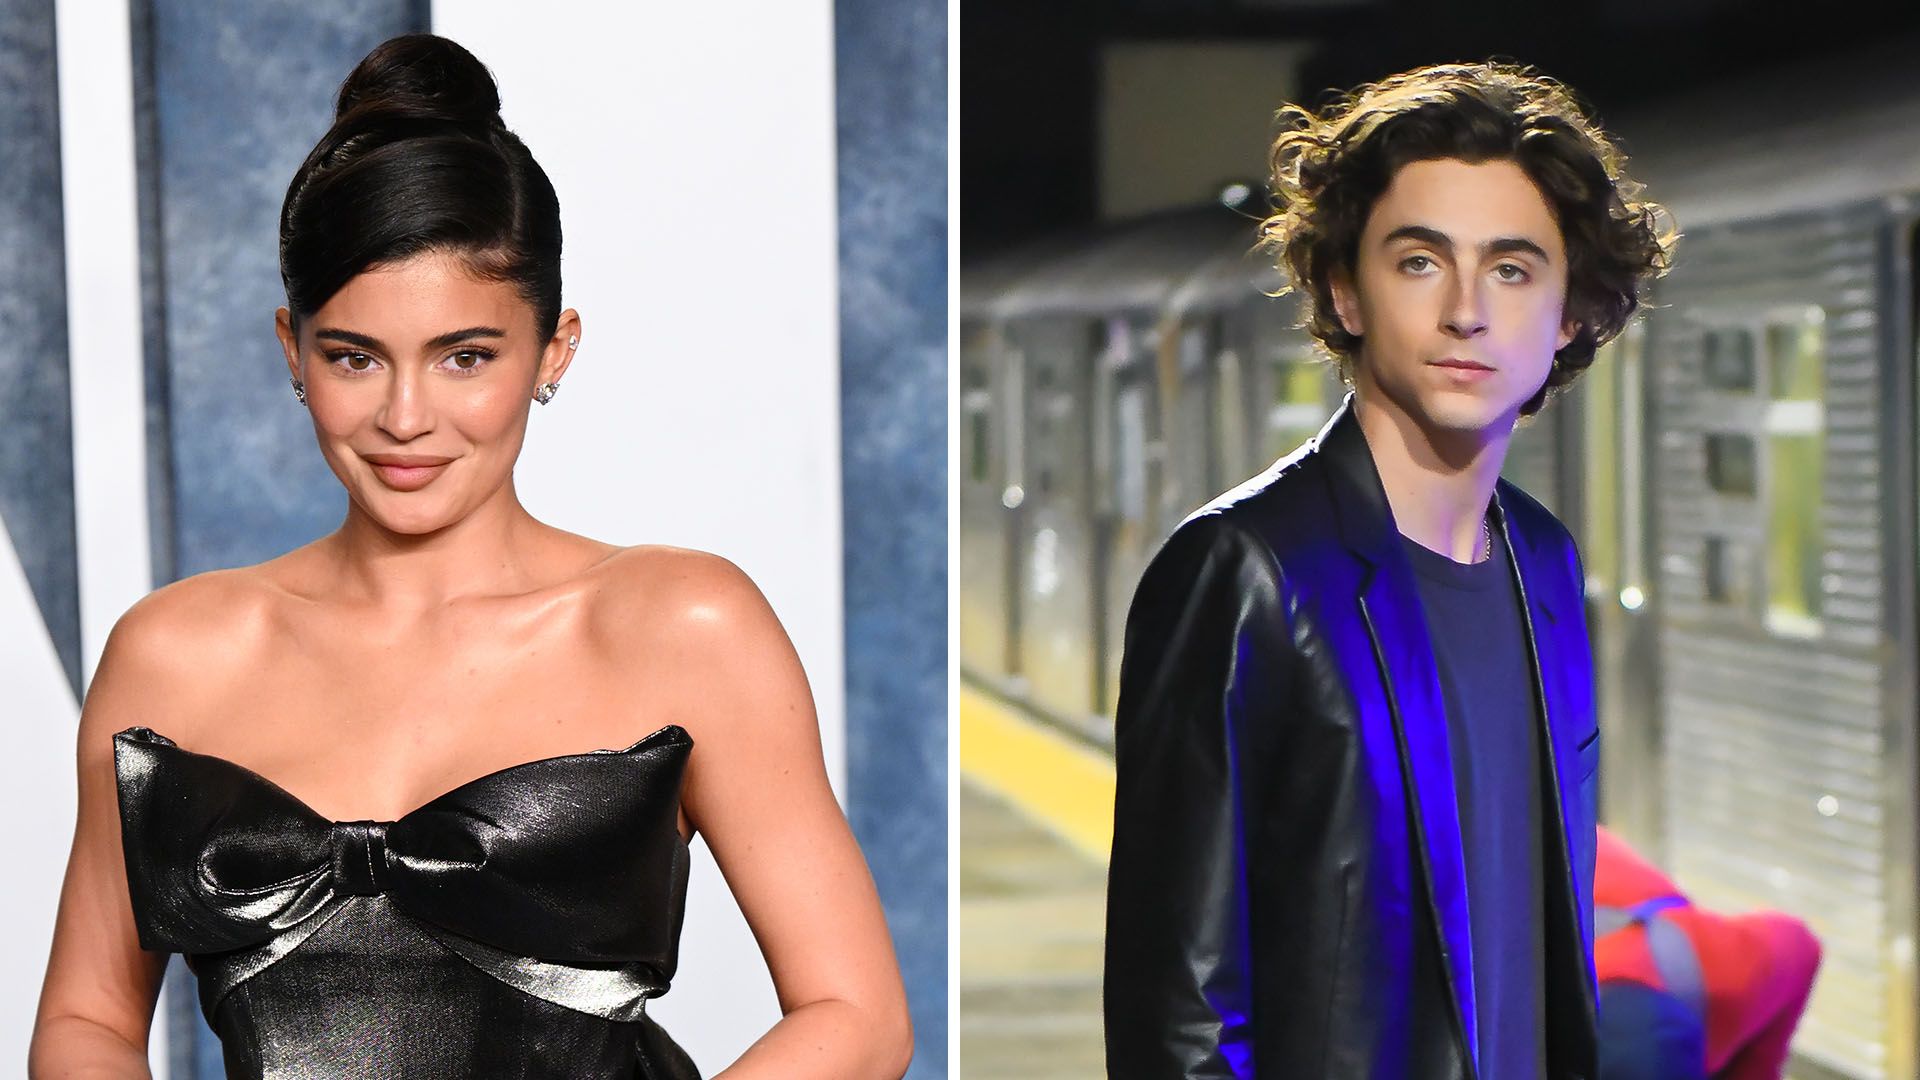 Kylie Jenner and Timothée Chalamet are total style opposites at Beyoncé